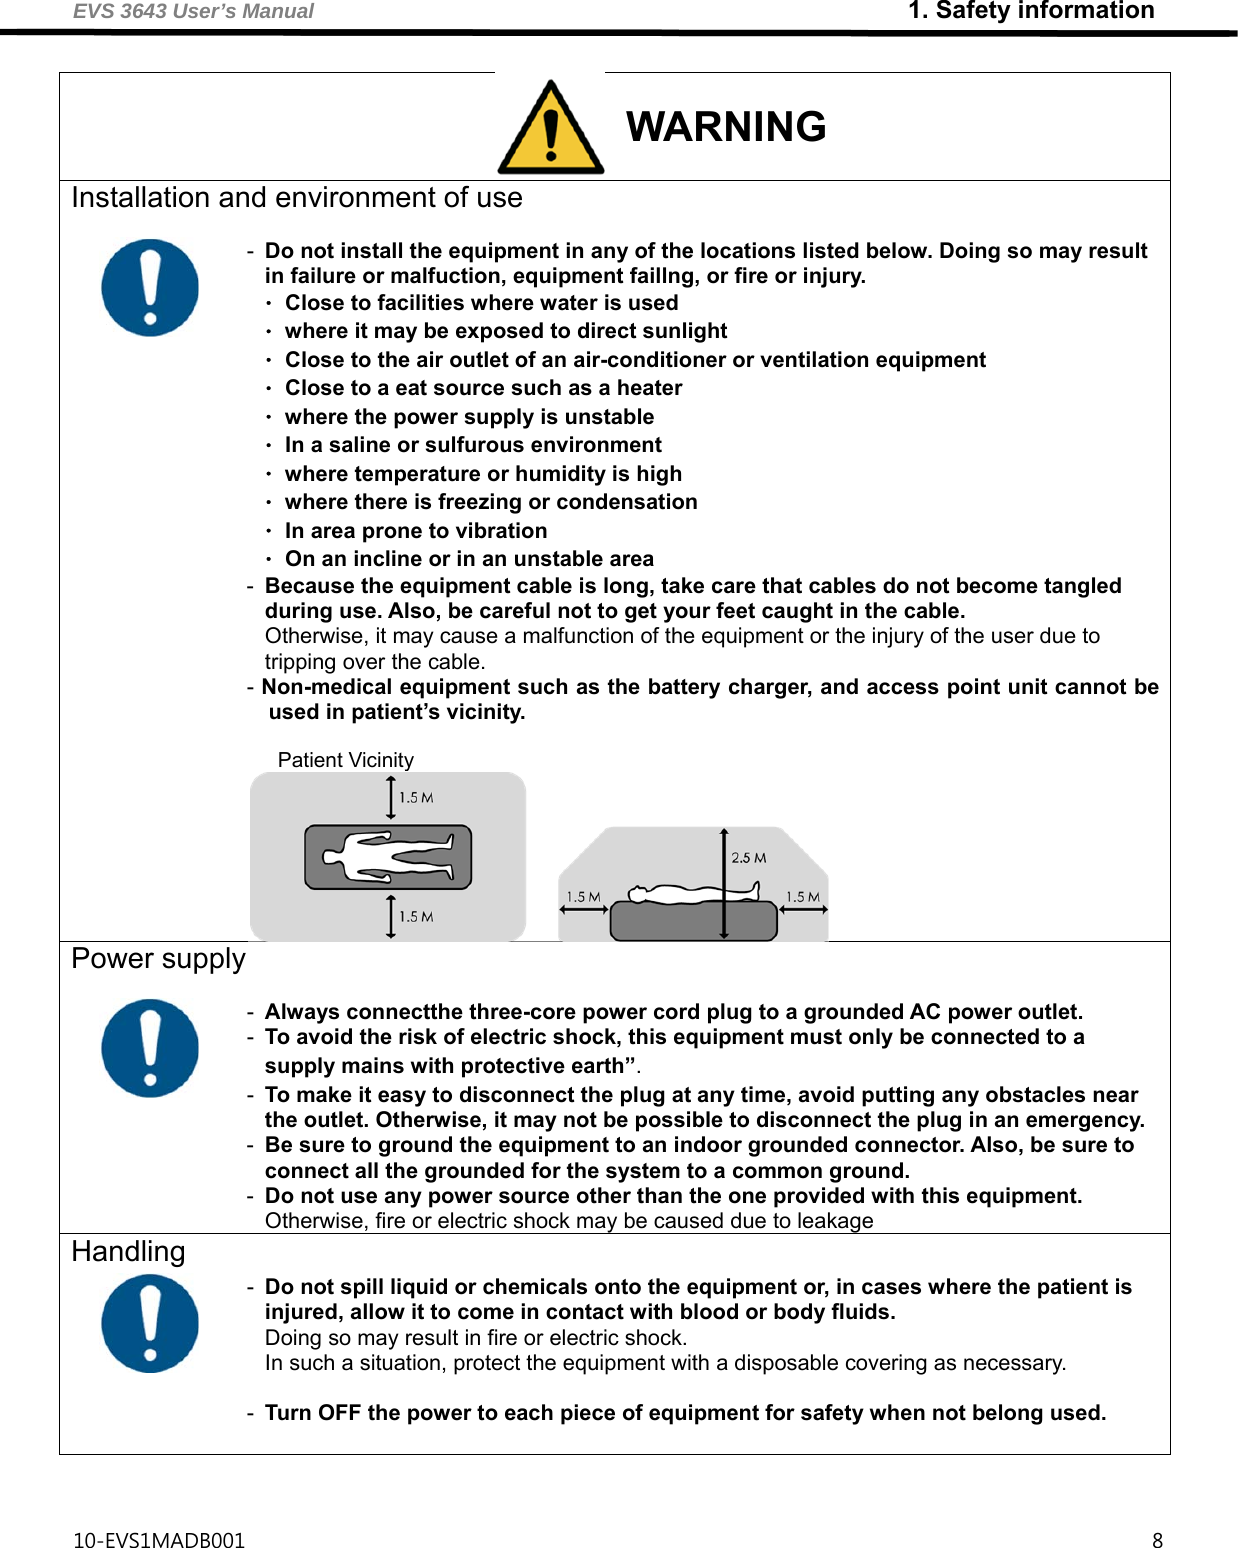 EVS 3643 User’s Manual                                                         1. Safety information 10-EVS1MADB001                                                                                       8   WARNING Installation and environment of use               -  Do not install the equipment in any of the locations listed below. Doing so may result in failure or malfuction, equipment faillng, or fire or injury. ㆍClose to facilities where water is used ㆍwhere it may be exposed to direct sunlight ㆍClose to the air outlet of an air-conditioner or ventilation equipment ㆍClose to a eat source such as a heater ㆍwhere the power supply is unstable ㆍIn a saline or sulfurous environment ㆍwhere temperature or humidity is high ㆍwhere there is freezing or condensation ㆍIn area prone to vibration ㆍOn an incline or in an unstable area   -  Because the equipment cable is long, take care that cables do not become tangled during use. Also, be careful not to get your feet caught in the cable. Otherwise, it may cause a malfunction of the equipment or the injury of the user due to tripping over the cable. - Non-medical equipment such as the battery charger, and access point unit cannot be used in patient’s vicinity.  Patient Vicinity Power supply      -  Always connectthe three-core power cord plug to a grounded AC power outlet. -  To avoid the risk of electric shock, this equipment must only be connected to a supply mains with protective earth”. -  To make it easy to disconnect the plug at any time, avoid putting any obstacles near the outlet. Otherwise, it may not be possible to disconnect the plug in an emergency. -  Be sure to ground the equipment to an indoor grounded connector. Also, be sure to connect all the grounded for the system to a common ground. -  Do not use any power source other than the one provided with this equipment. Otherwise, fire or electric shock may be caused due to leakage Handling   -  Do not spill liquid or chemicals onto the equipment or, in cases where the patient is injured, allow it to come in contact with blood or body fluids. Doing so may result in fire or electric shock. In such a situation, protect the equipment with a disposable covering as necessary.  -  Turn OFF the power to each piece of equipment for safety when not belong used.  